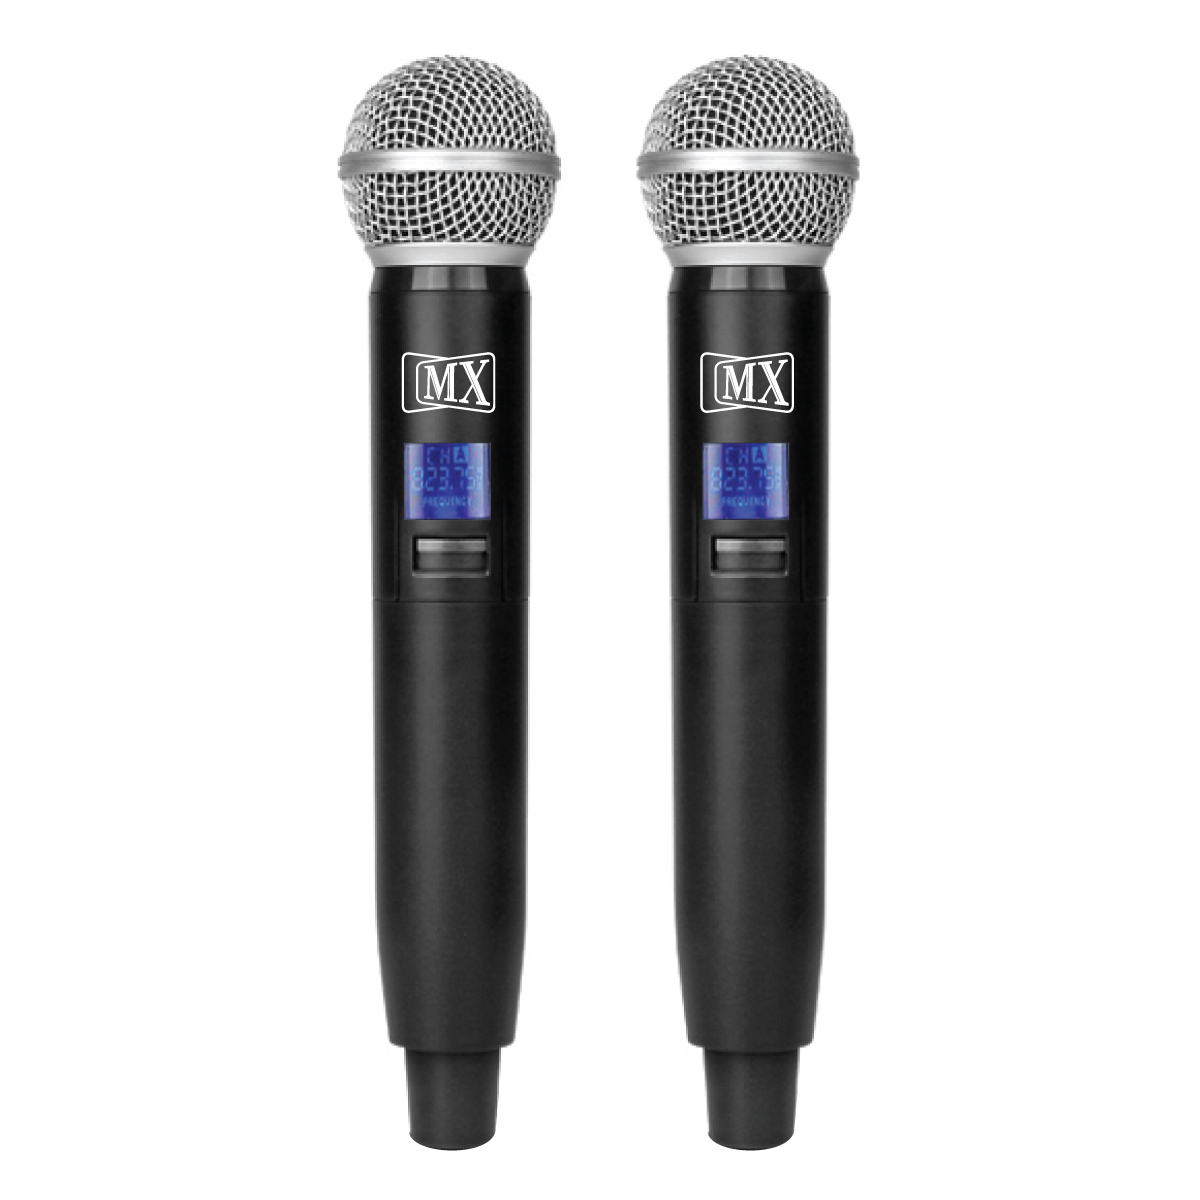 MX UHF Wireless Microphone System with one handheld mic, featuring variable  frequency for parties, wedding hosts, business meetings, and multi-purpose  use. - MX MDR TECHNOLOGIES LIMITED